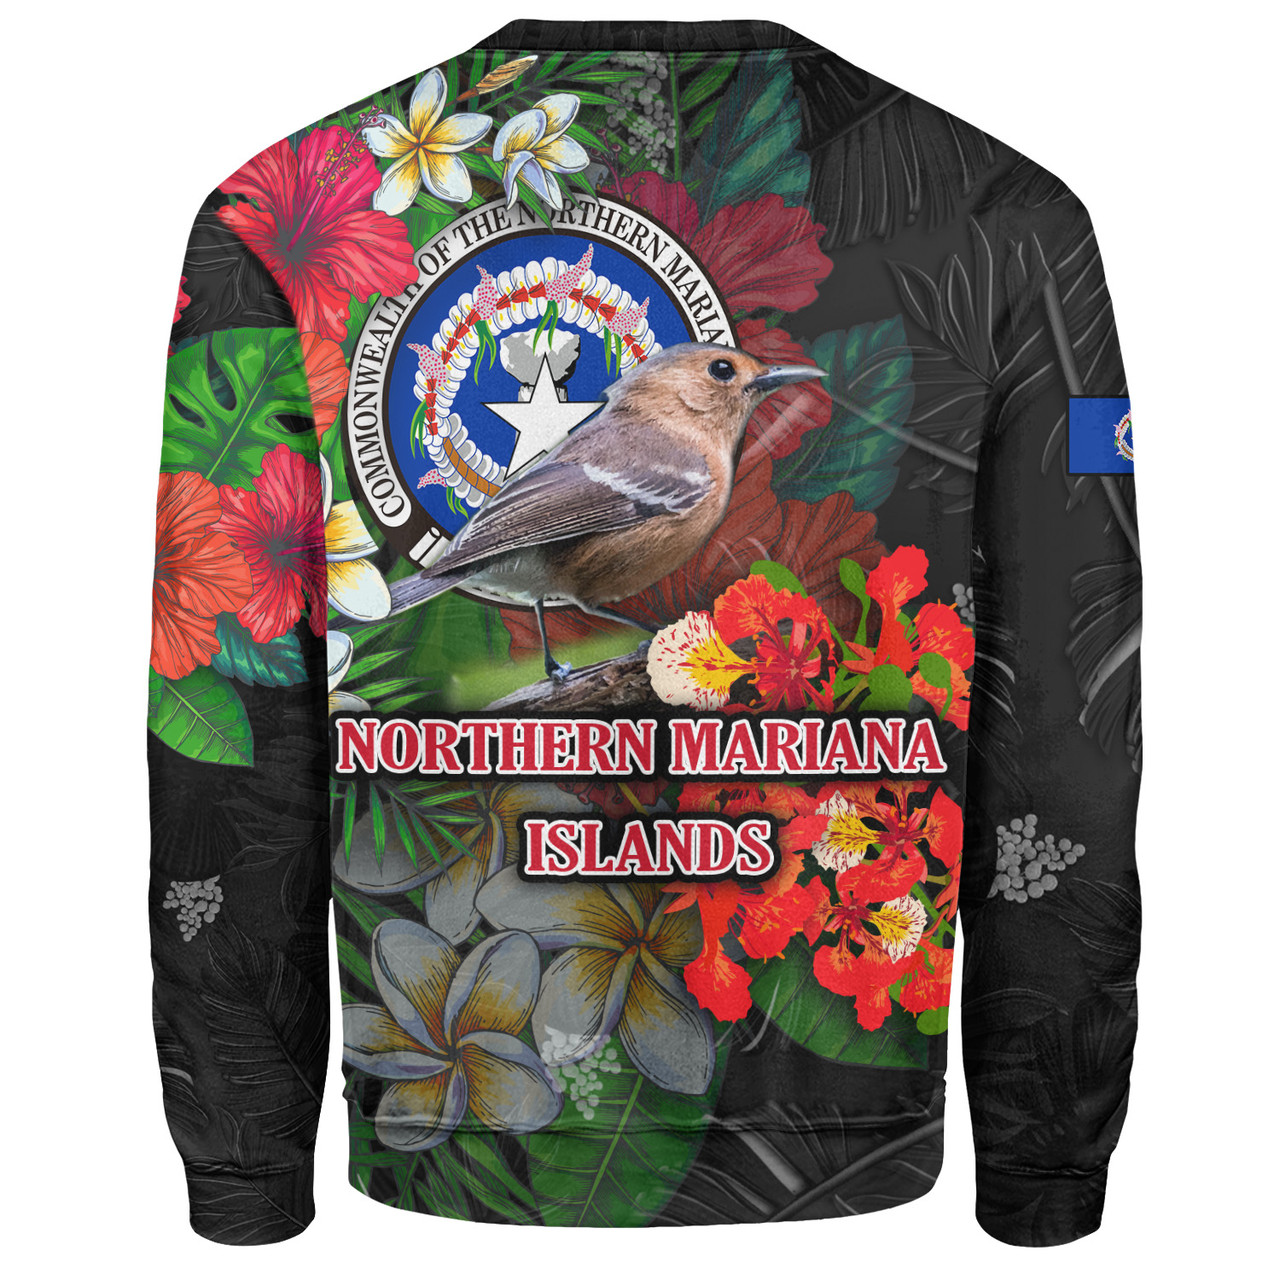 Northern Mariana Islands Sweatshirt Hibiscus And Plumeria With Palm Branches Vintage Style